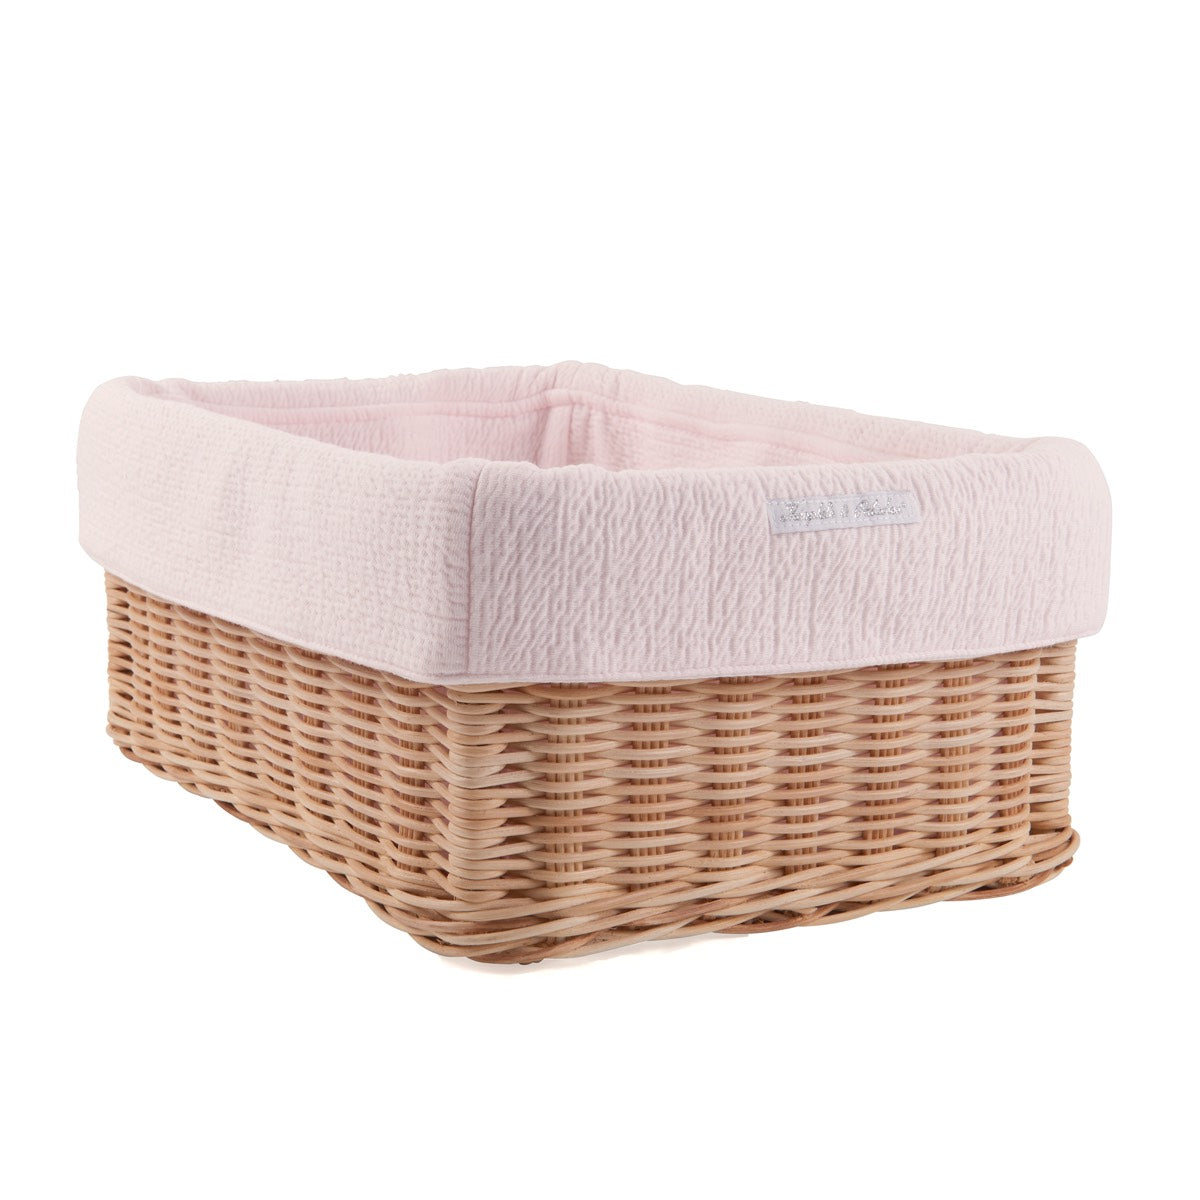 Theophile & Patachou Small Natural Wicker Basket and Cover - Cotton Pink